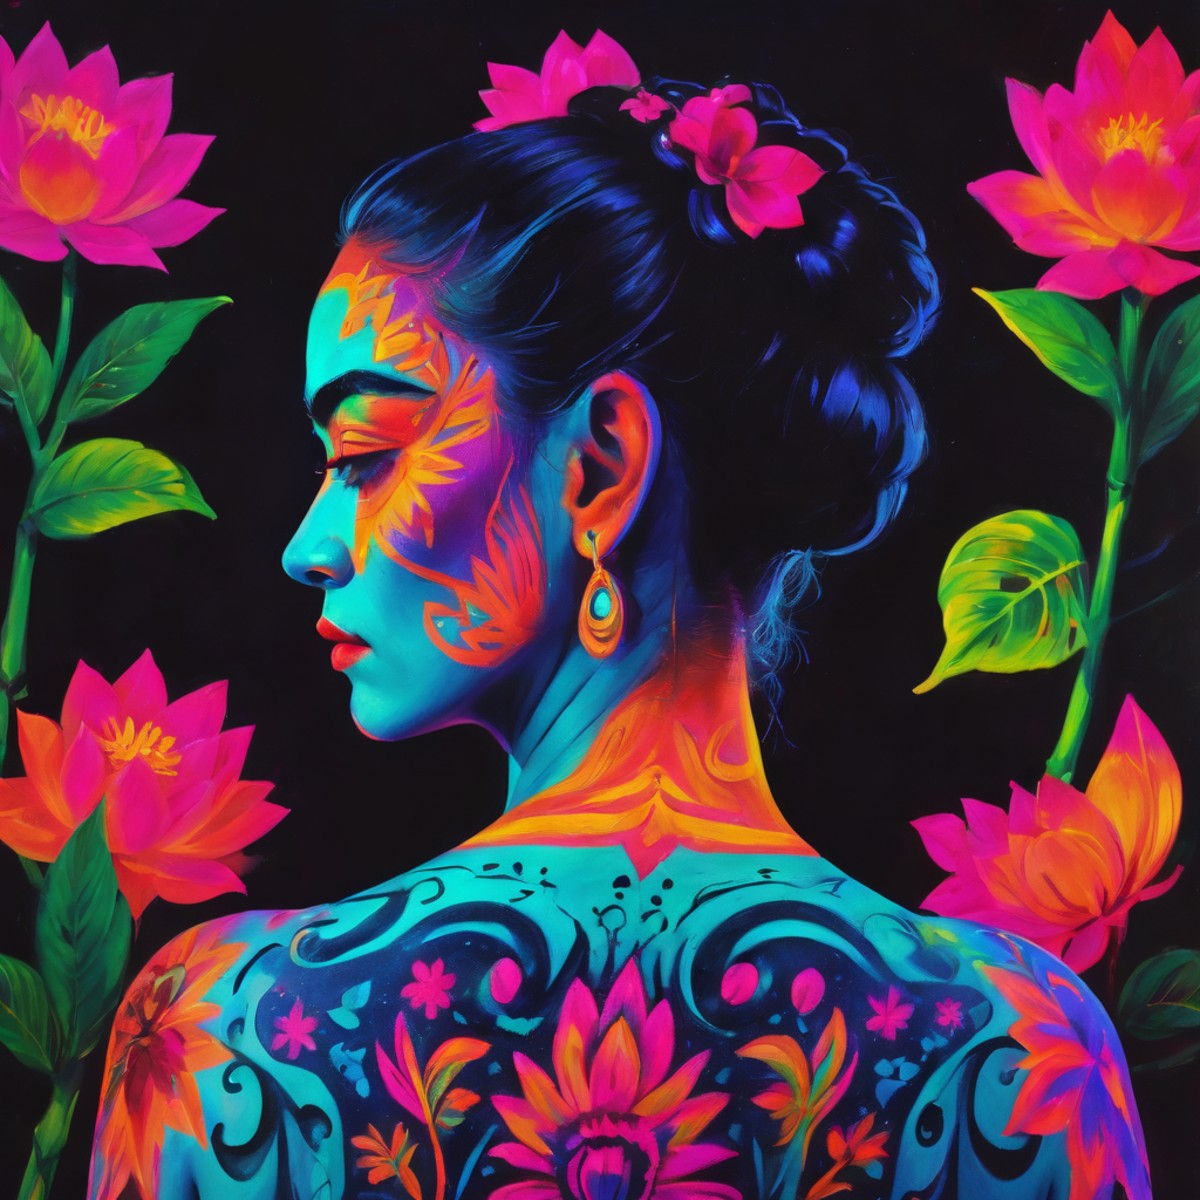 blacklight uv painted on the back of a girl depicting art in the style of Frida Kahlo